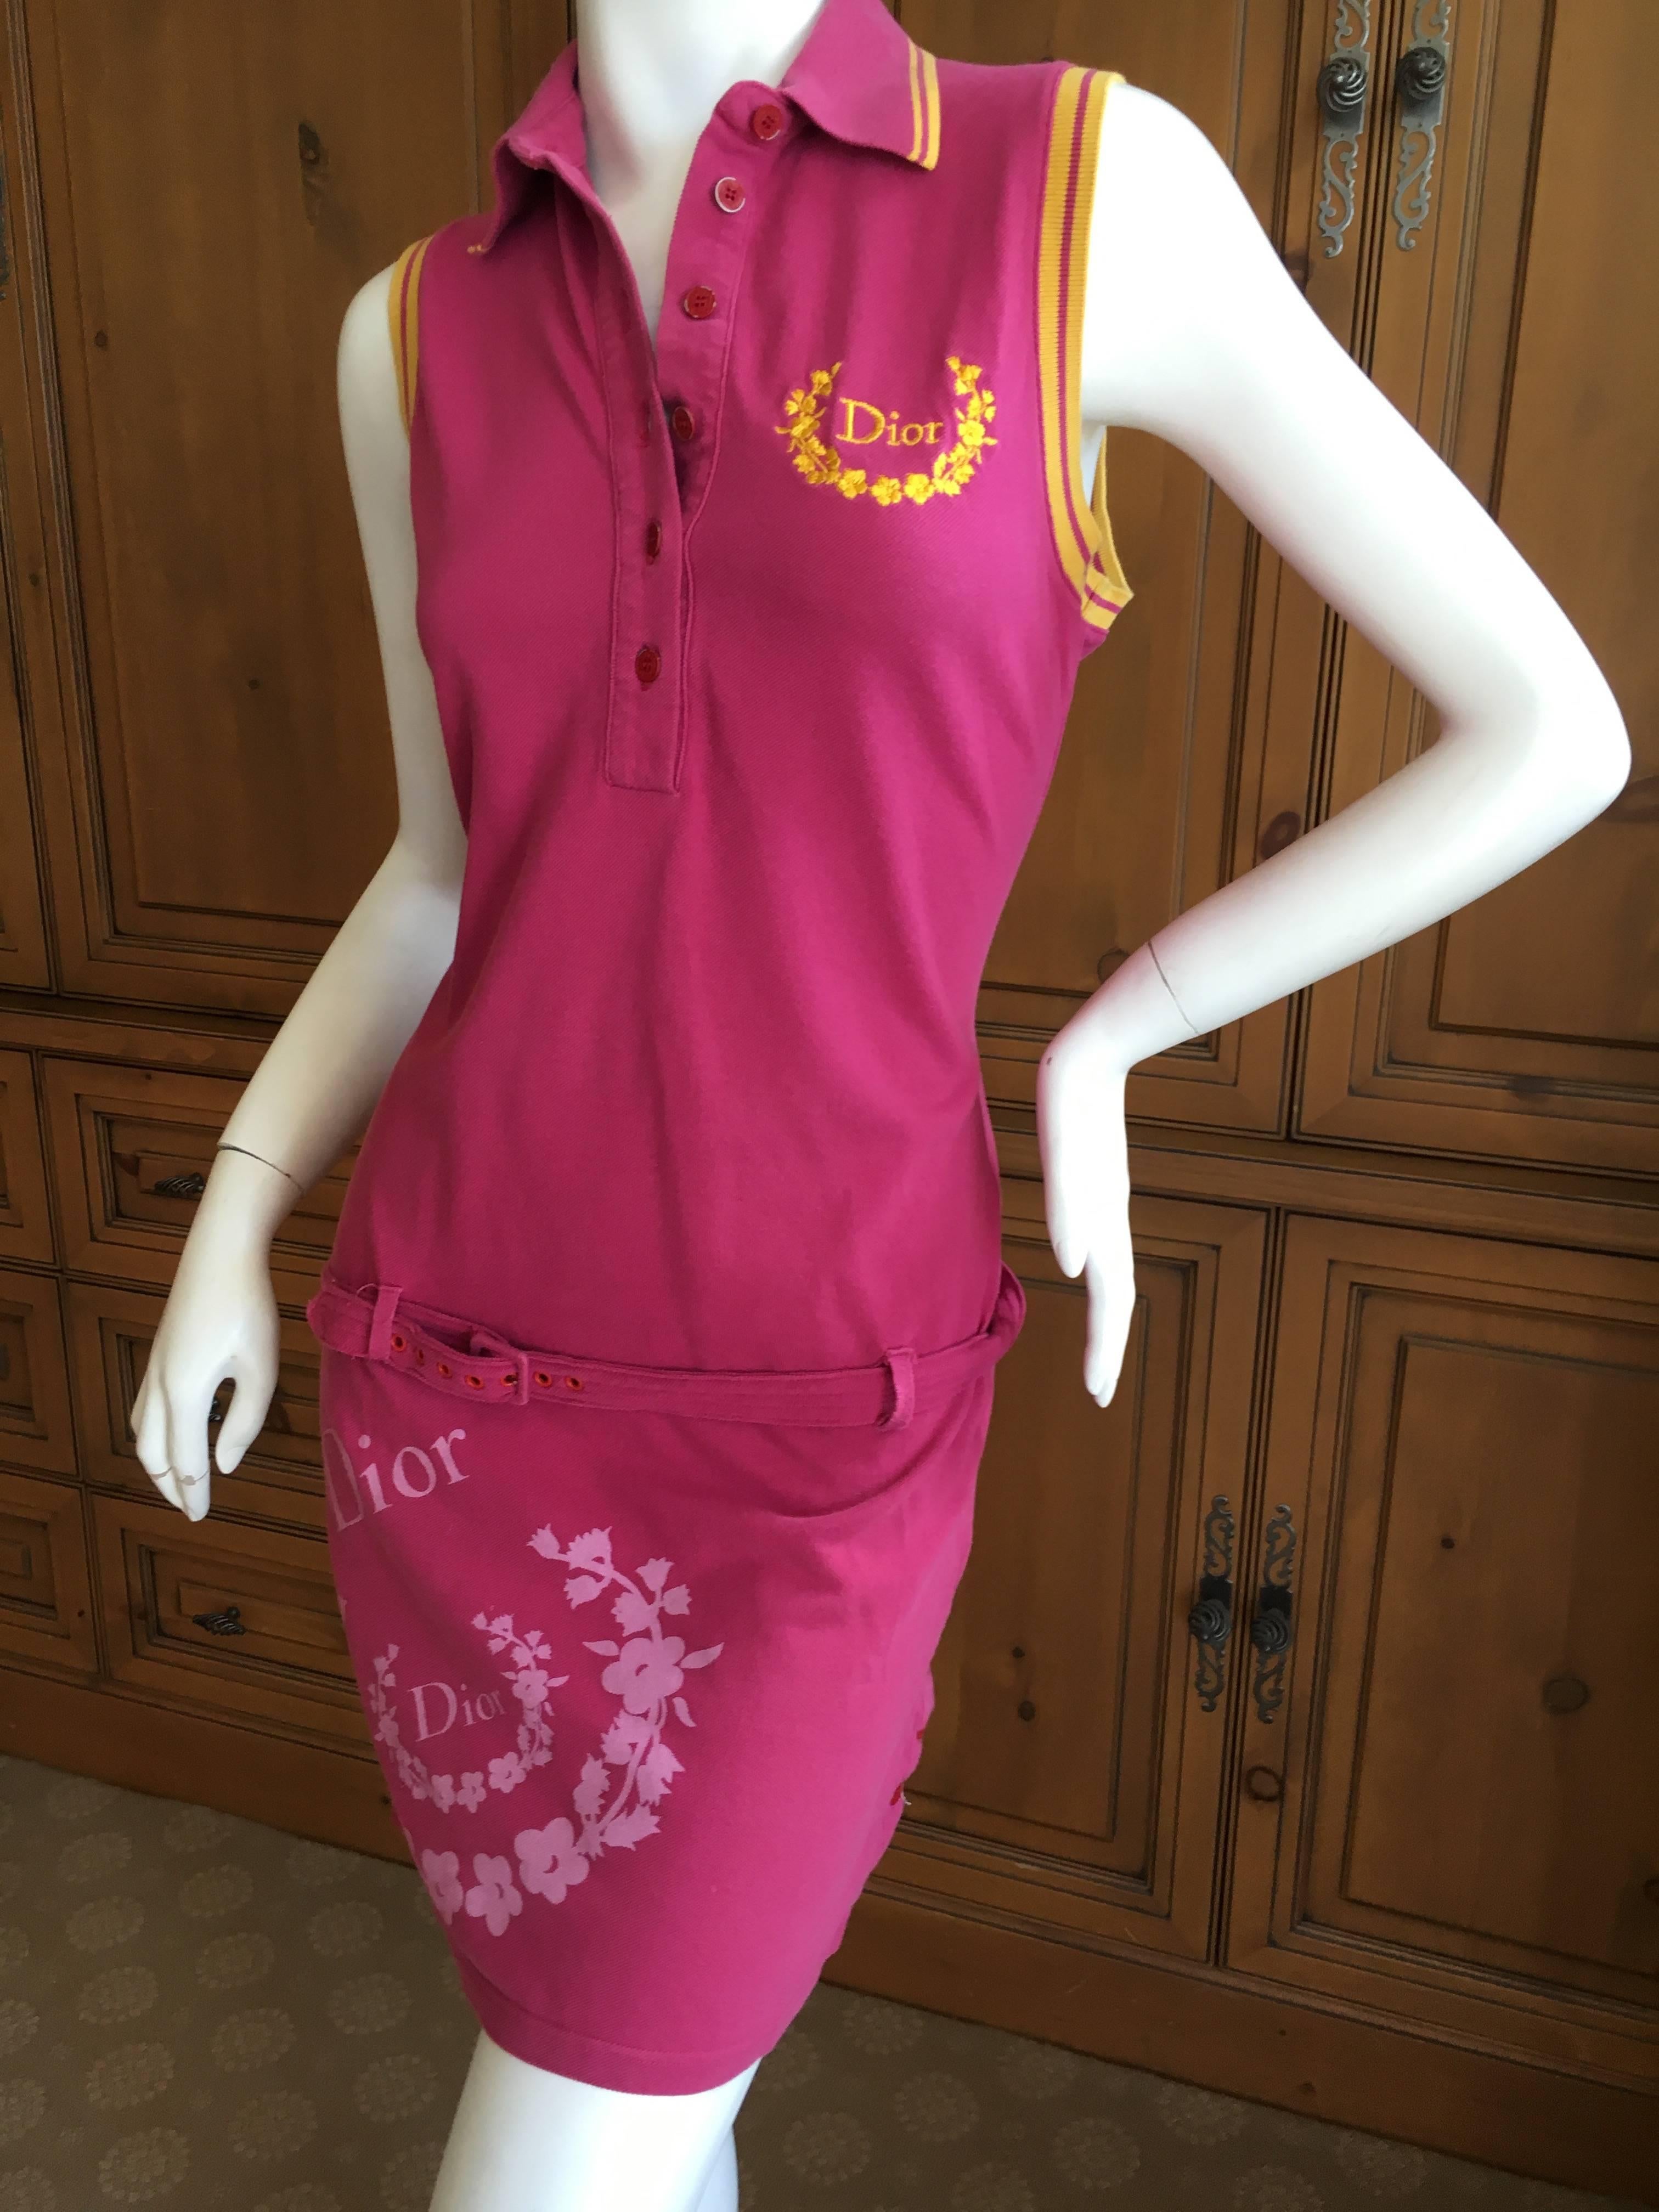 Christian Dior by Galliano Cotton Sleeveless Polo Dress In Good Condition For Sale In Cloverdale, CA